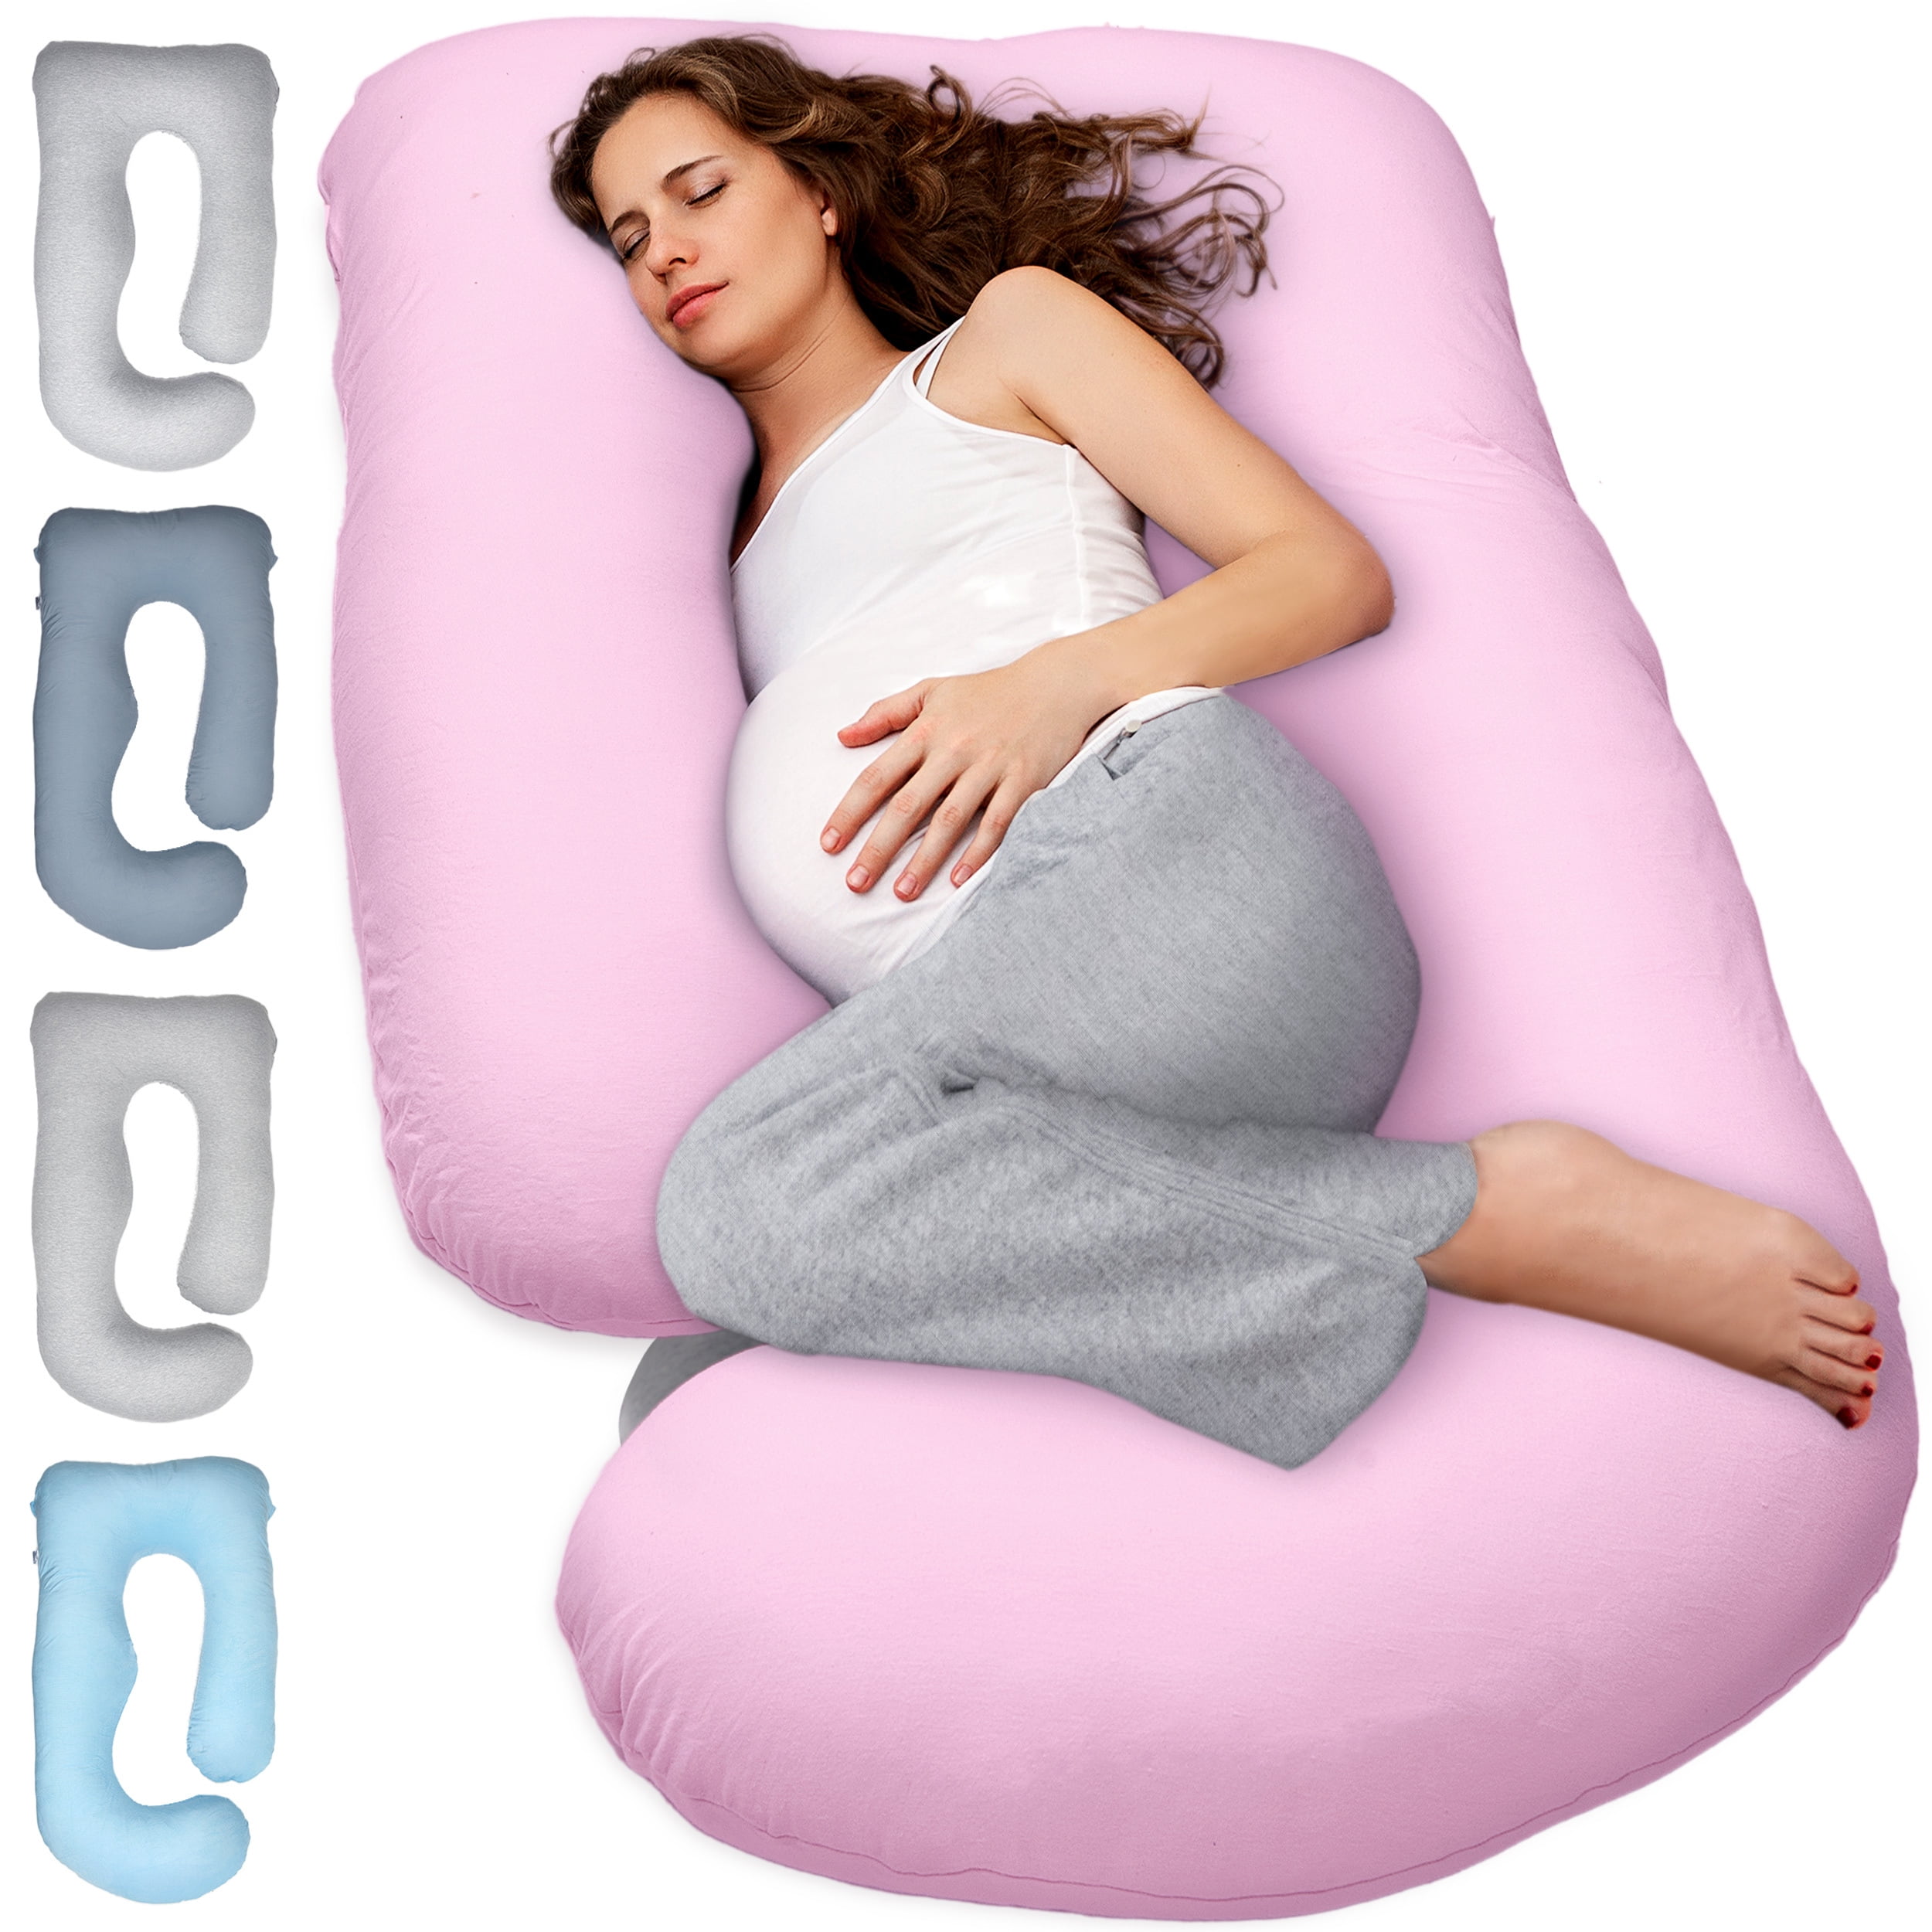 napz Pregnancy Pillows, Maternity Pillow Support for Backs, Hips, Legs,  Belly, Pregnancy Must Haves, Soft Body Pillow for Pregnant Women and Baby  with